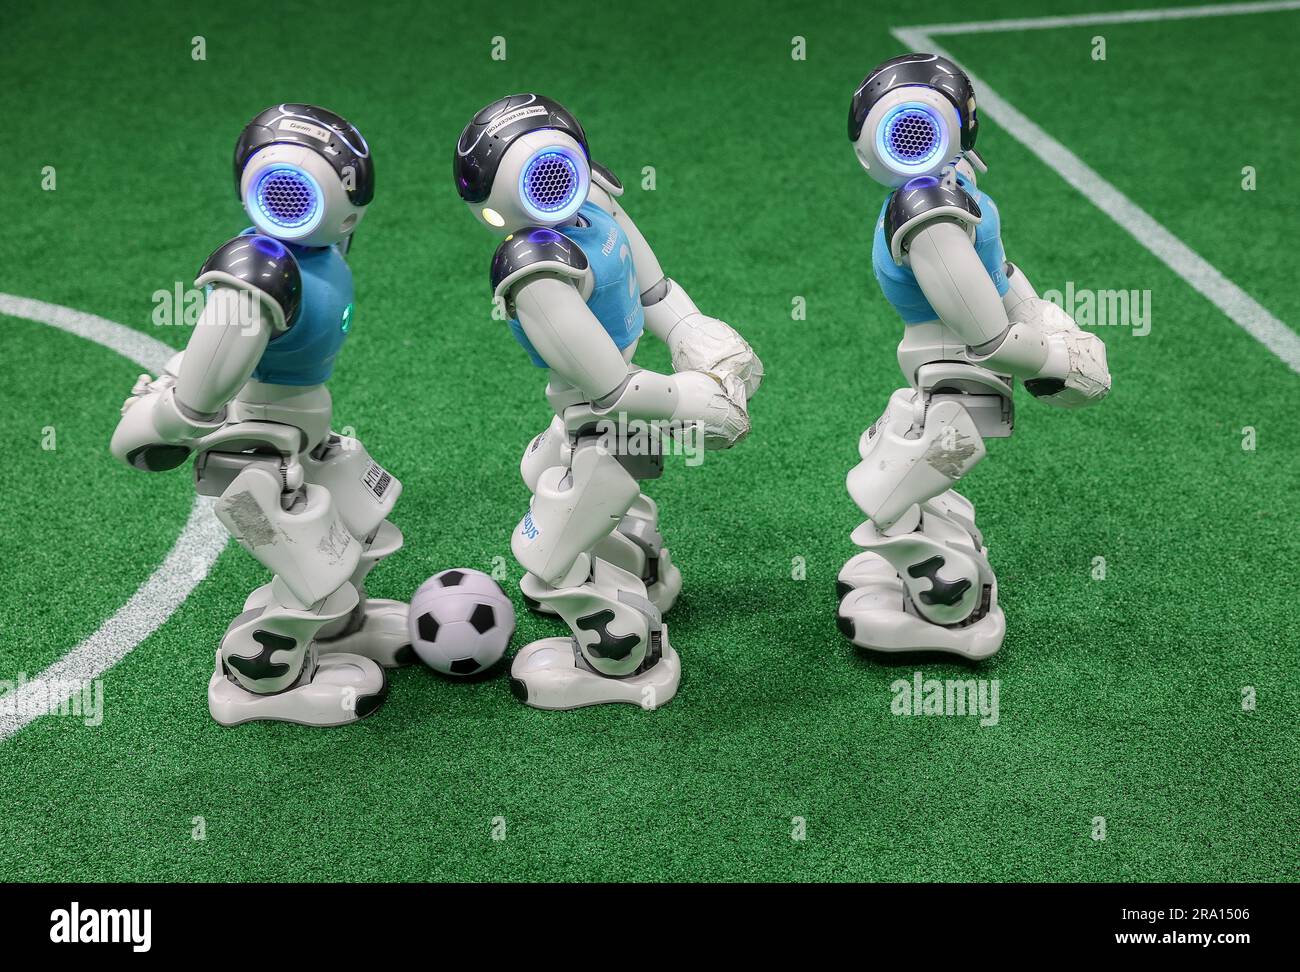 Leipzig, Germany. 28th June, 2023. Three Nao robots play soccer during a training game in a laboratory at the Leipzig University of Applied Sciences (HTWK). Having already become world champions in robot soccer in 2018, the Leipzig team is aiming to secure the title again this year. Starting July 5, robots playing soccer will face off in a World Cup in Bordeaux, France. Credit: Jan Woitas/dpa/Alamy Live News Stock Photo